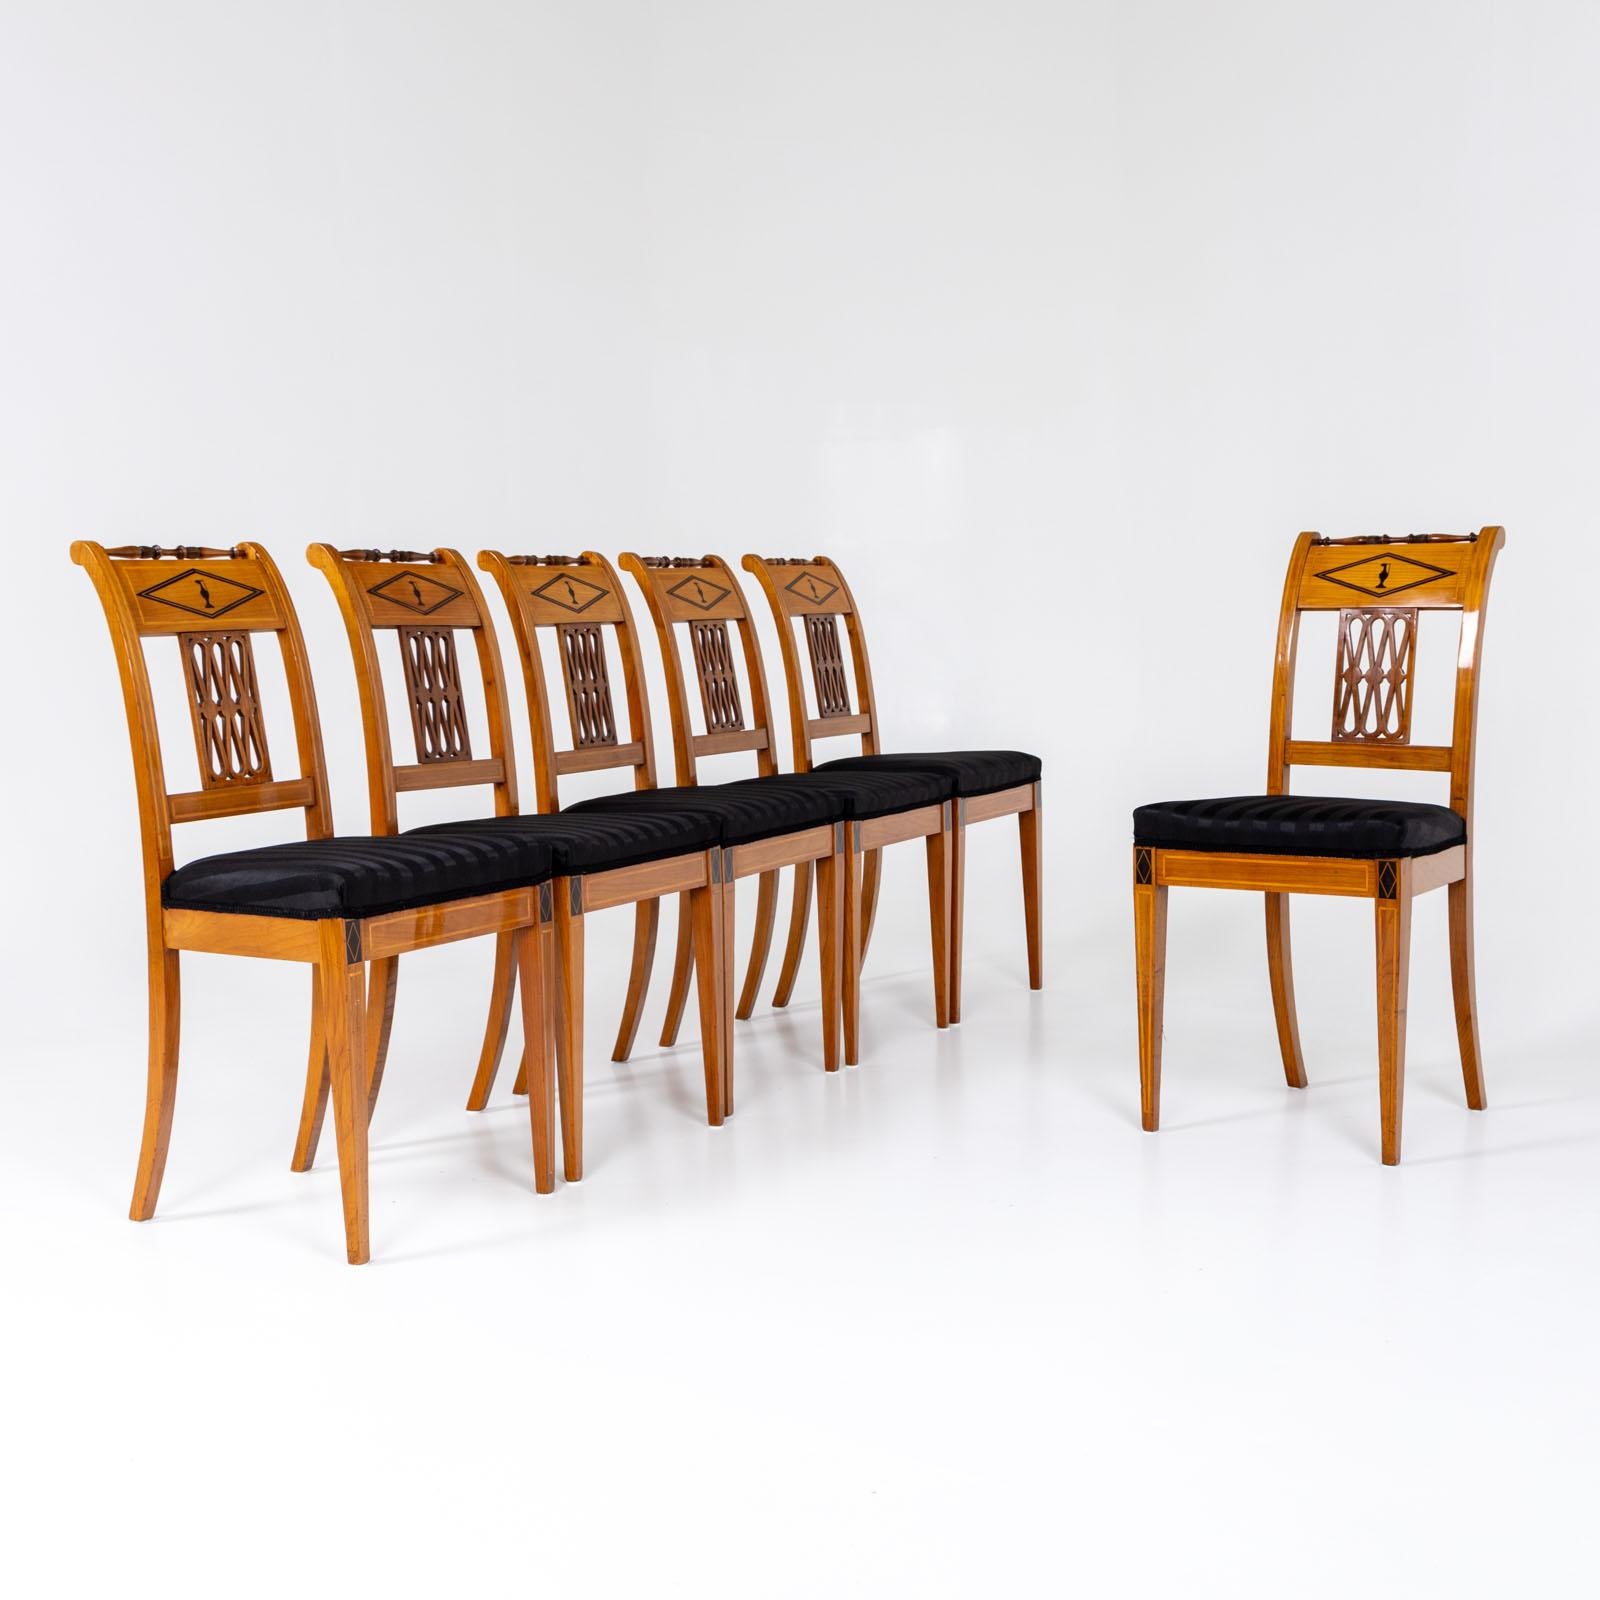 Set of six dining chairs and one armchair on high, elegant square tapered legs with thread inlays. The rear legs are slightly flared and, together with the rounded backrests, give the chairs an elegant curve. The backrests are broken and feature an